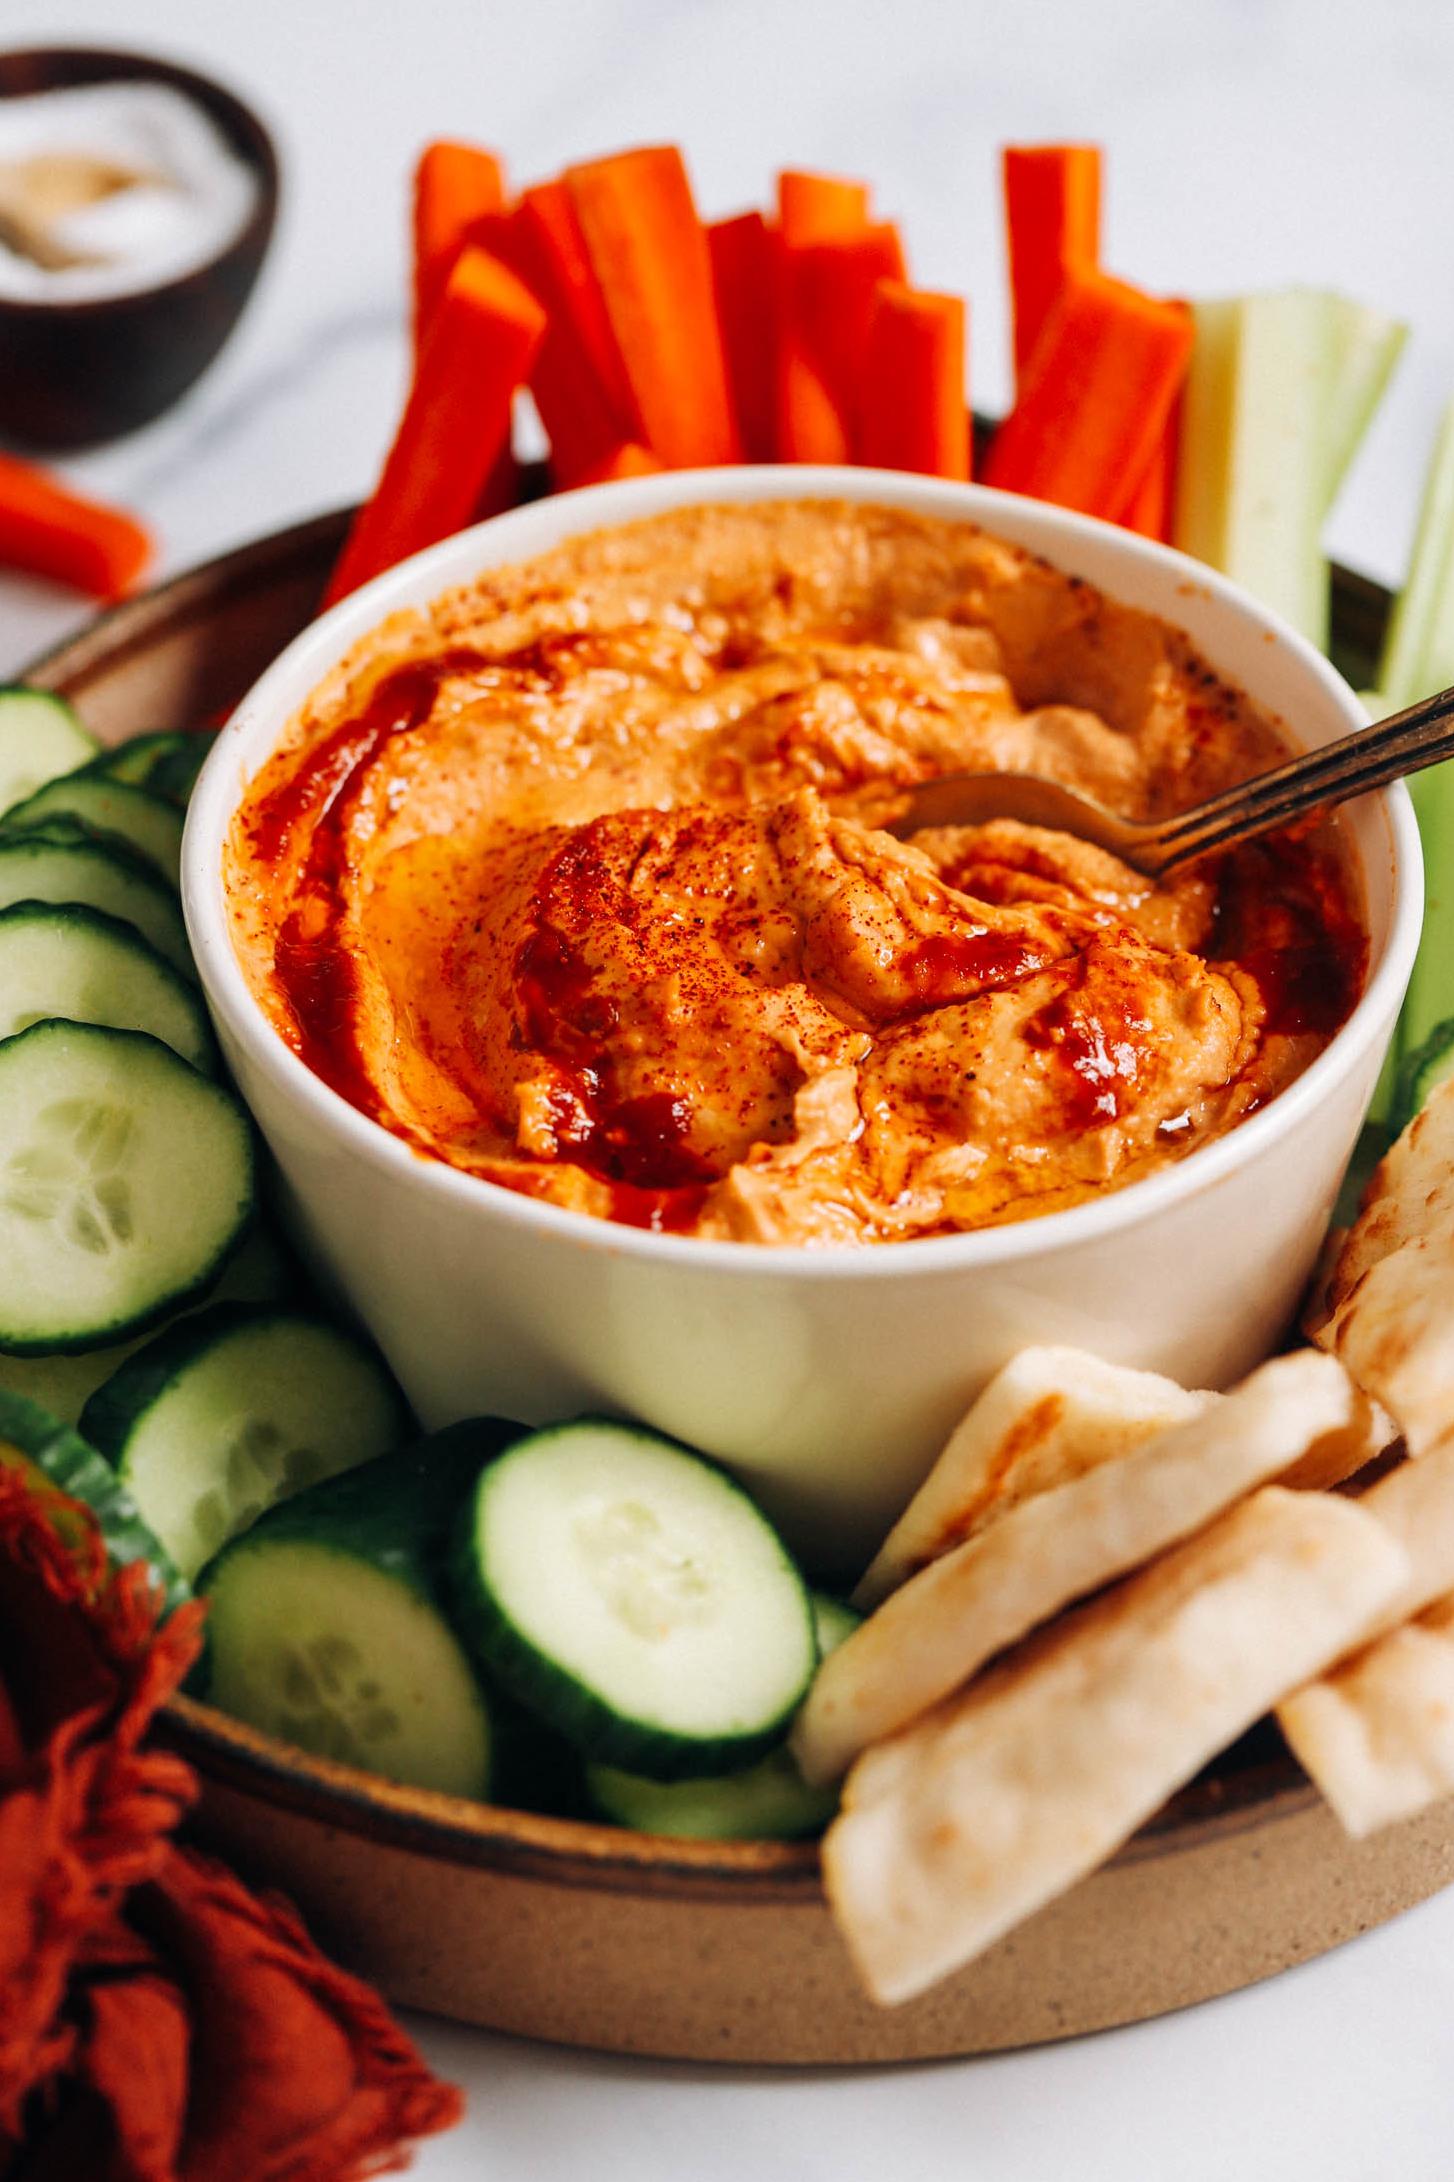  Chickpeas, tahini, and chipotle peppers in adobo sauce come together to create this delicious dip.